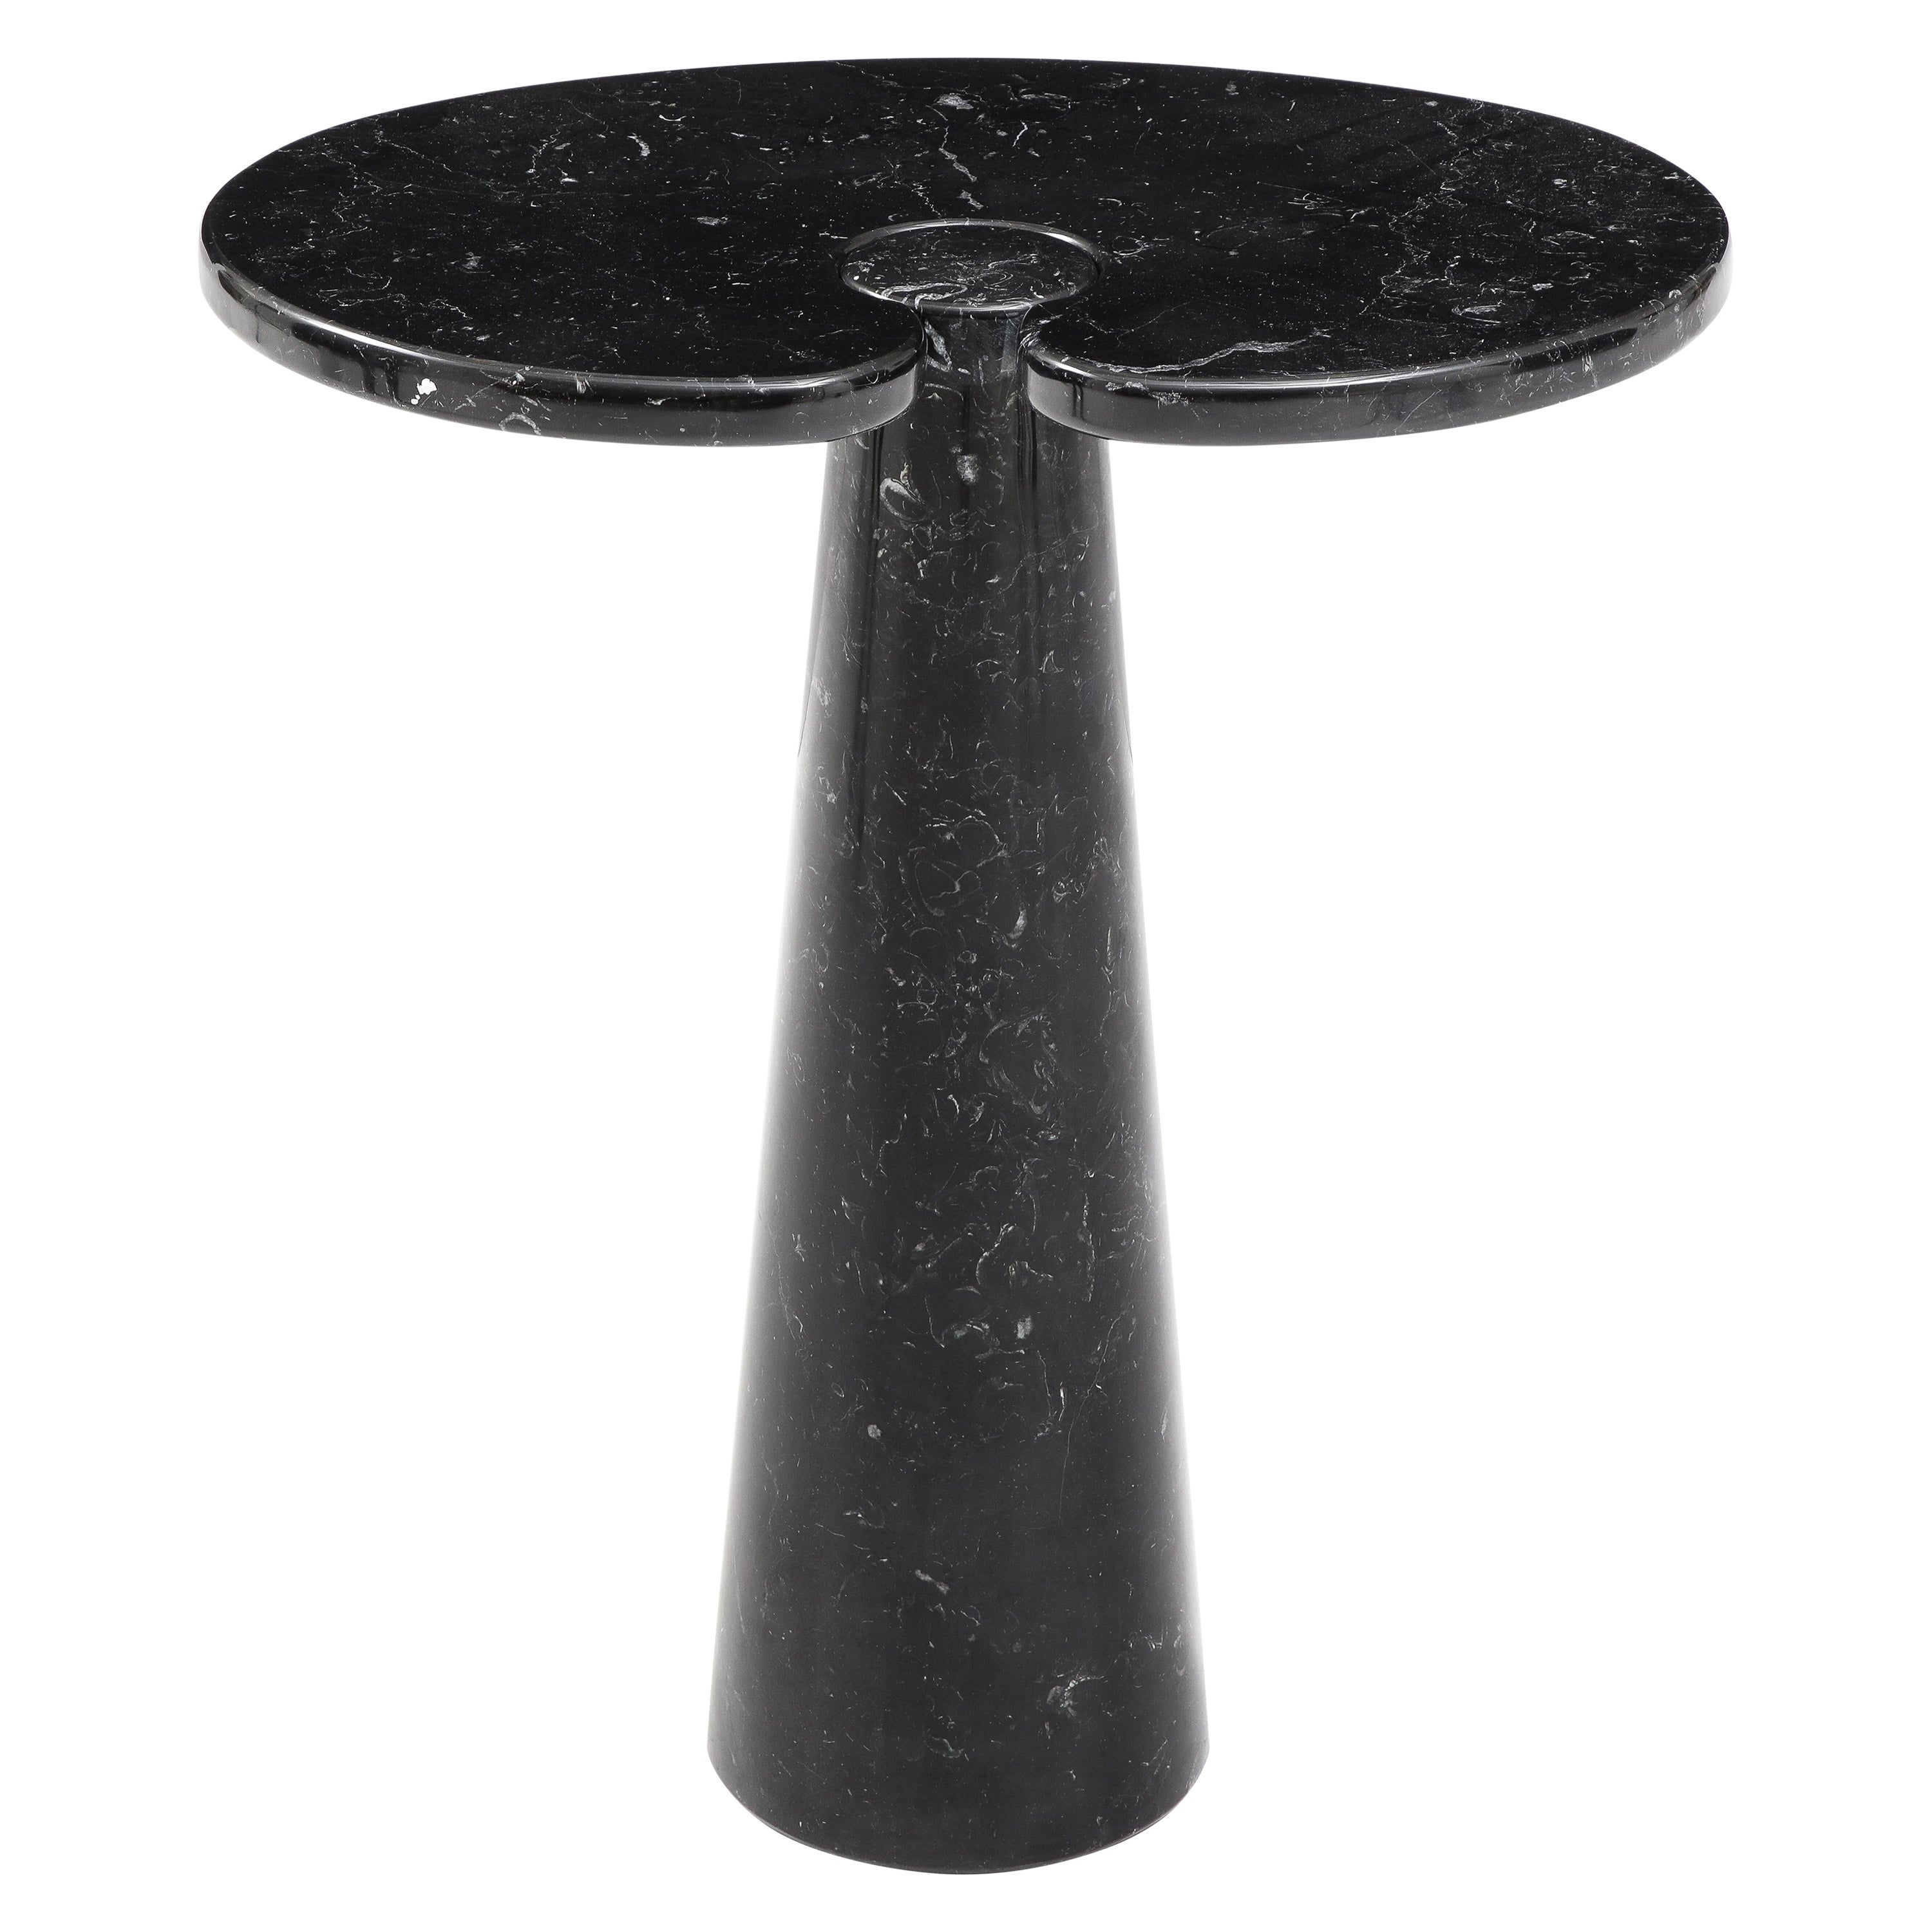 Angelo Mangiarotti Nero Marquina Marble Tall Side Table from Eros Series, 1971